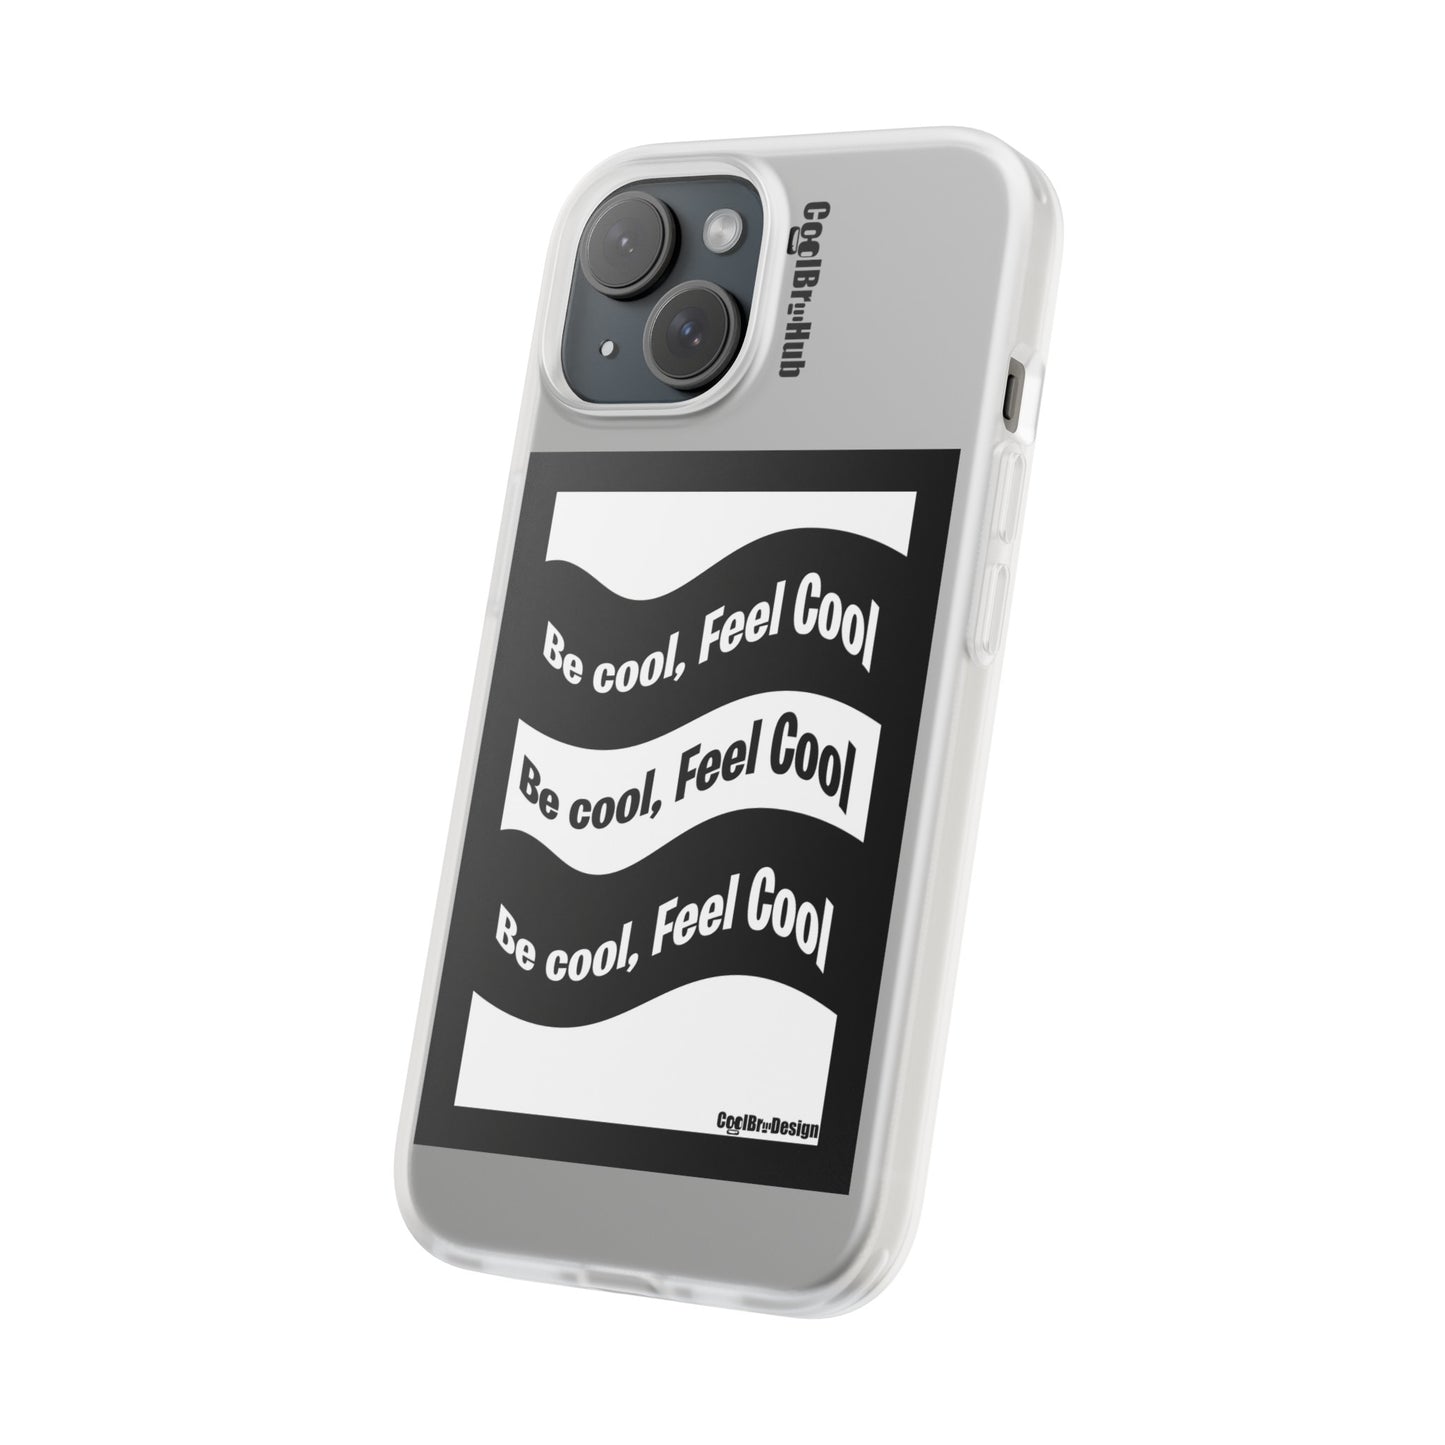 Be Cool, Feel Cool Phone Case